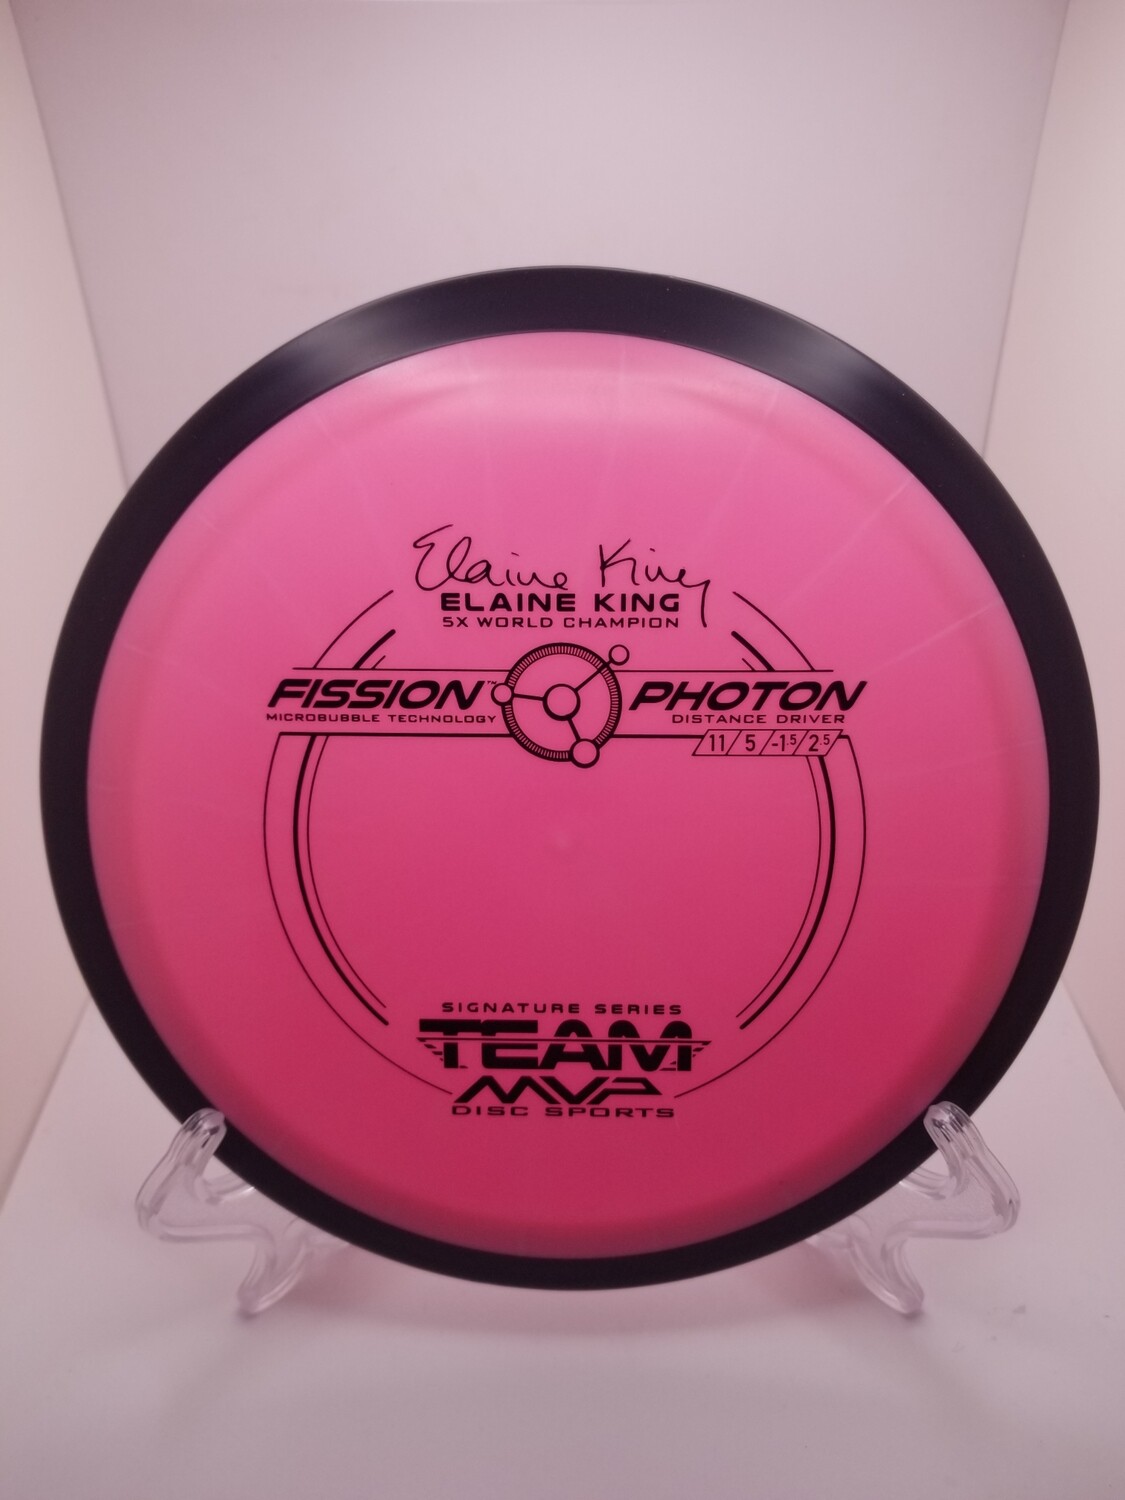 MVP Elaine King Pink Stamped Fission Photon 155g